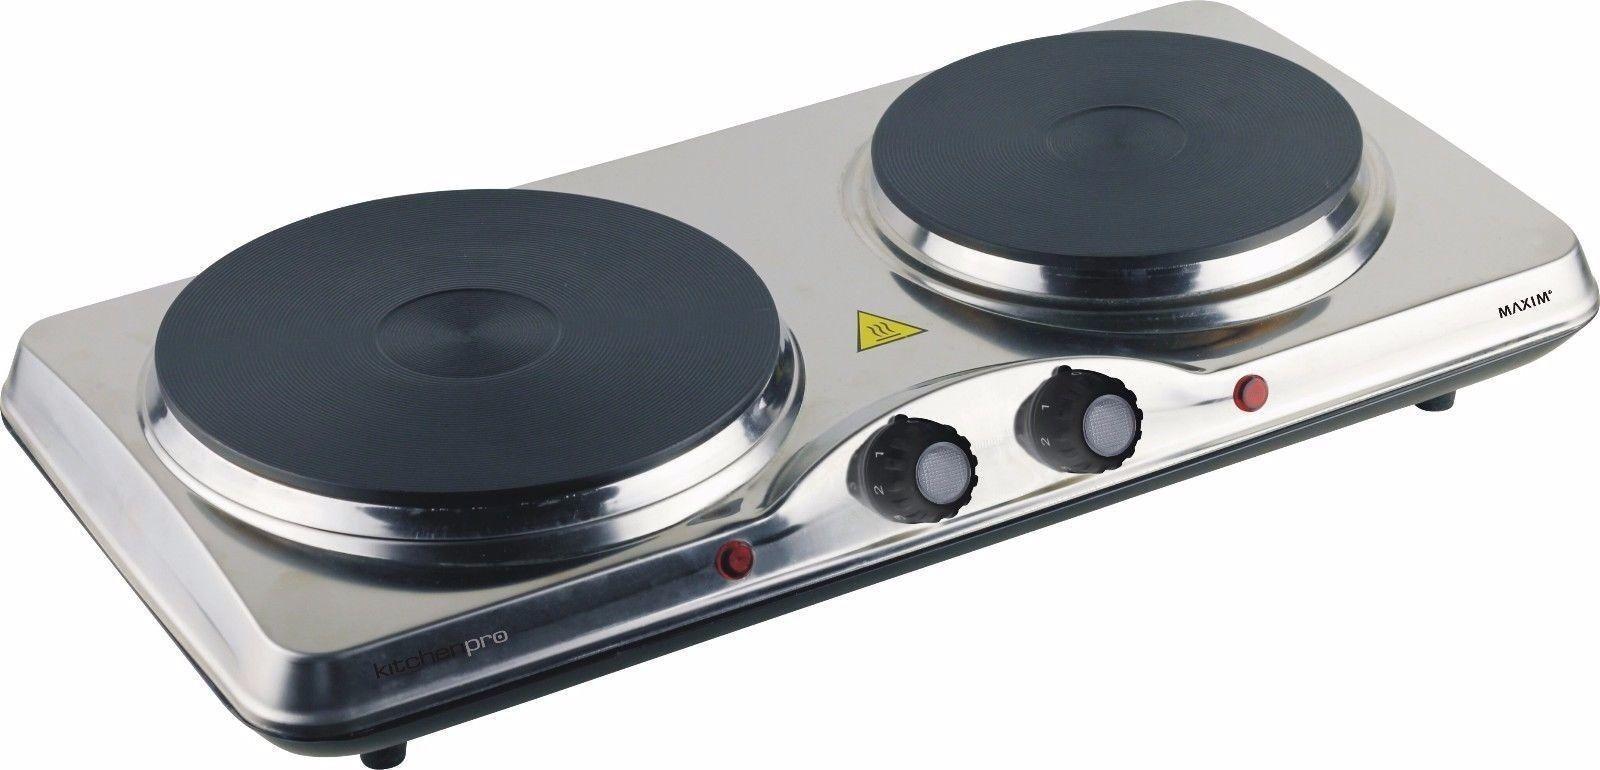 Portable Electric Stove Double Twin Hot Plate Cooker RV Cooktop Cooking Home